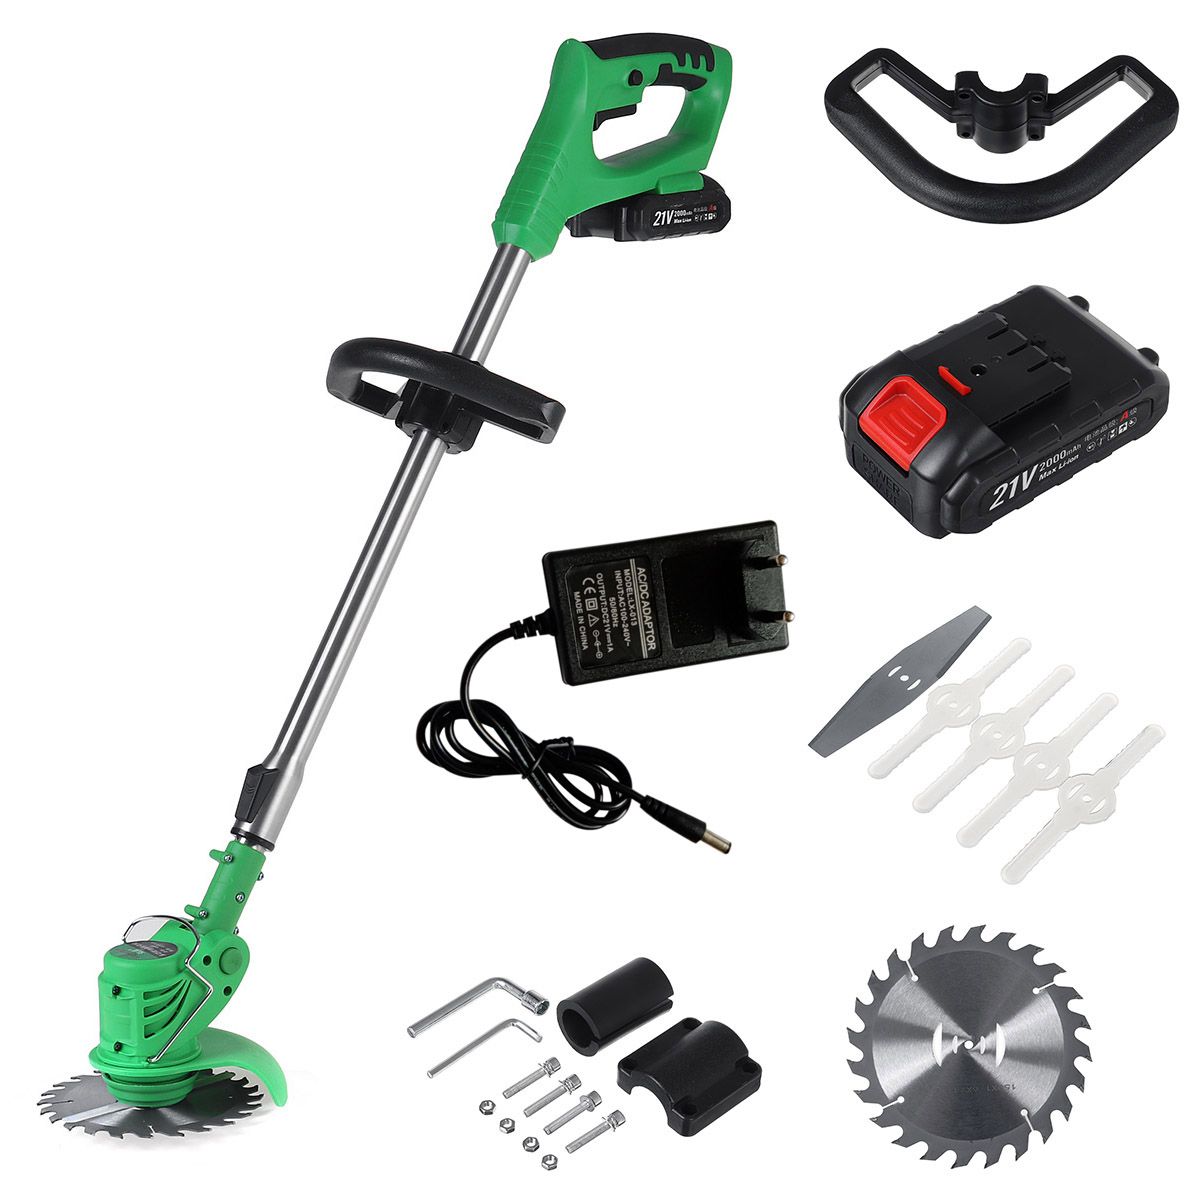 36V-650W-Electric-Lawn-Mower-Small-Lithium-Ion-Cordless-Garden-Yard-Grass-Trimmer-1735695